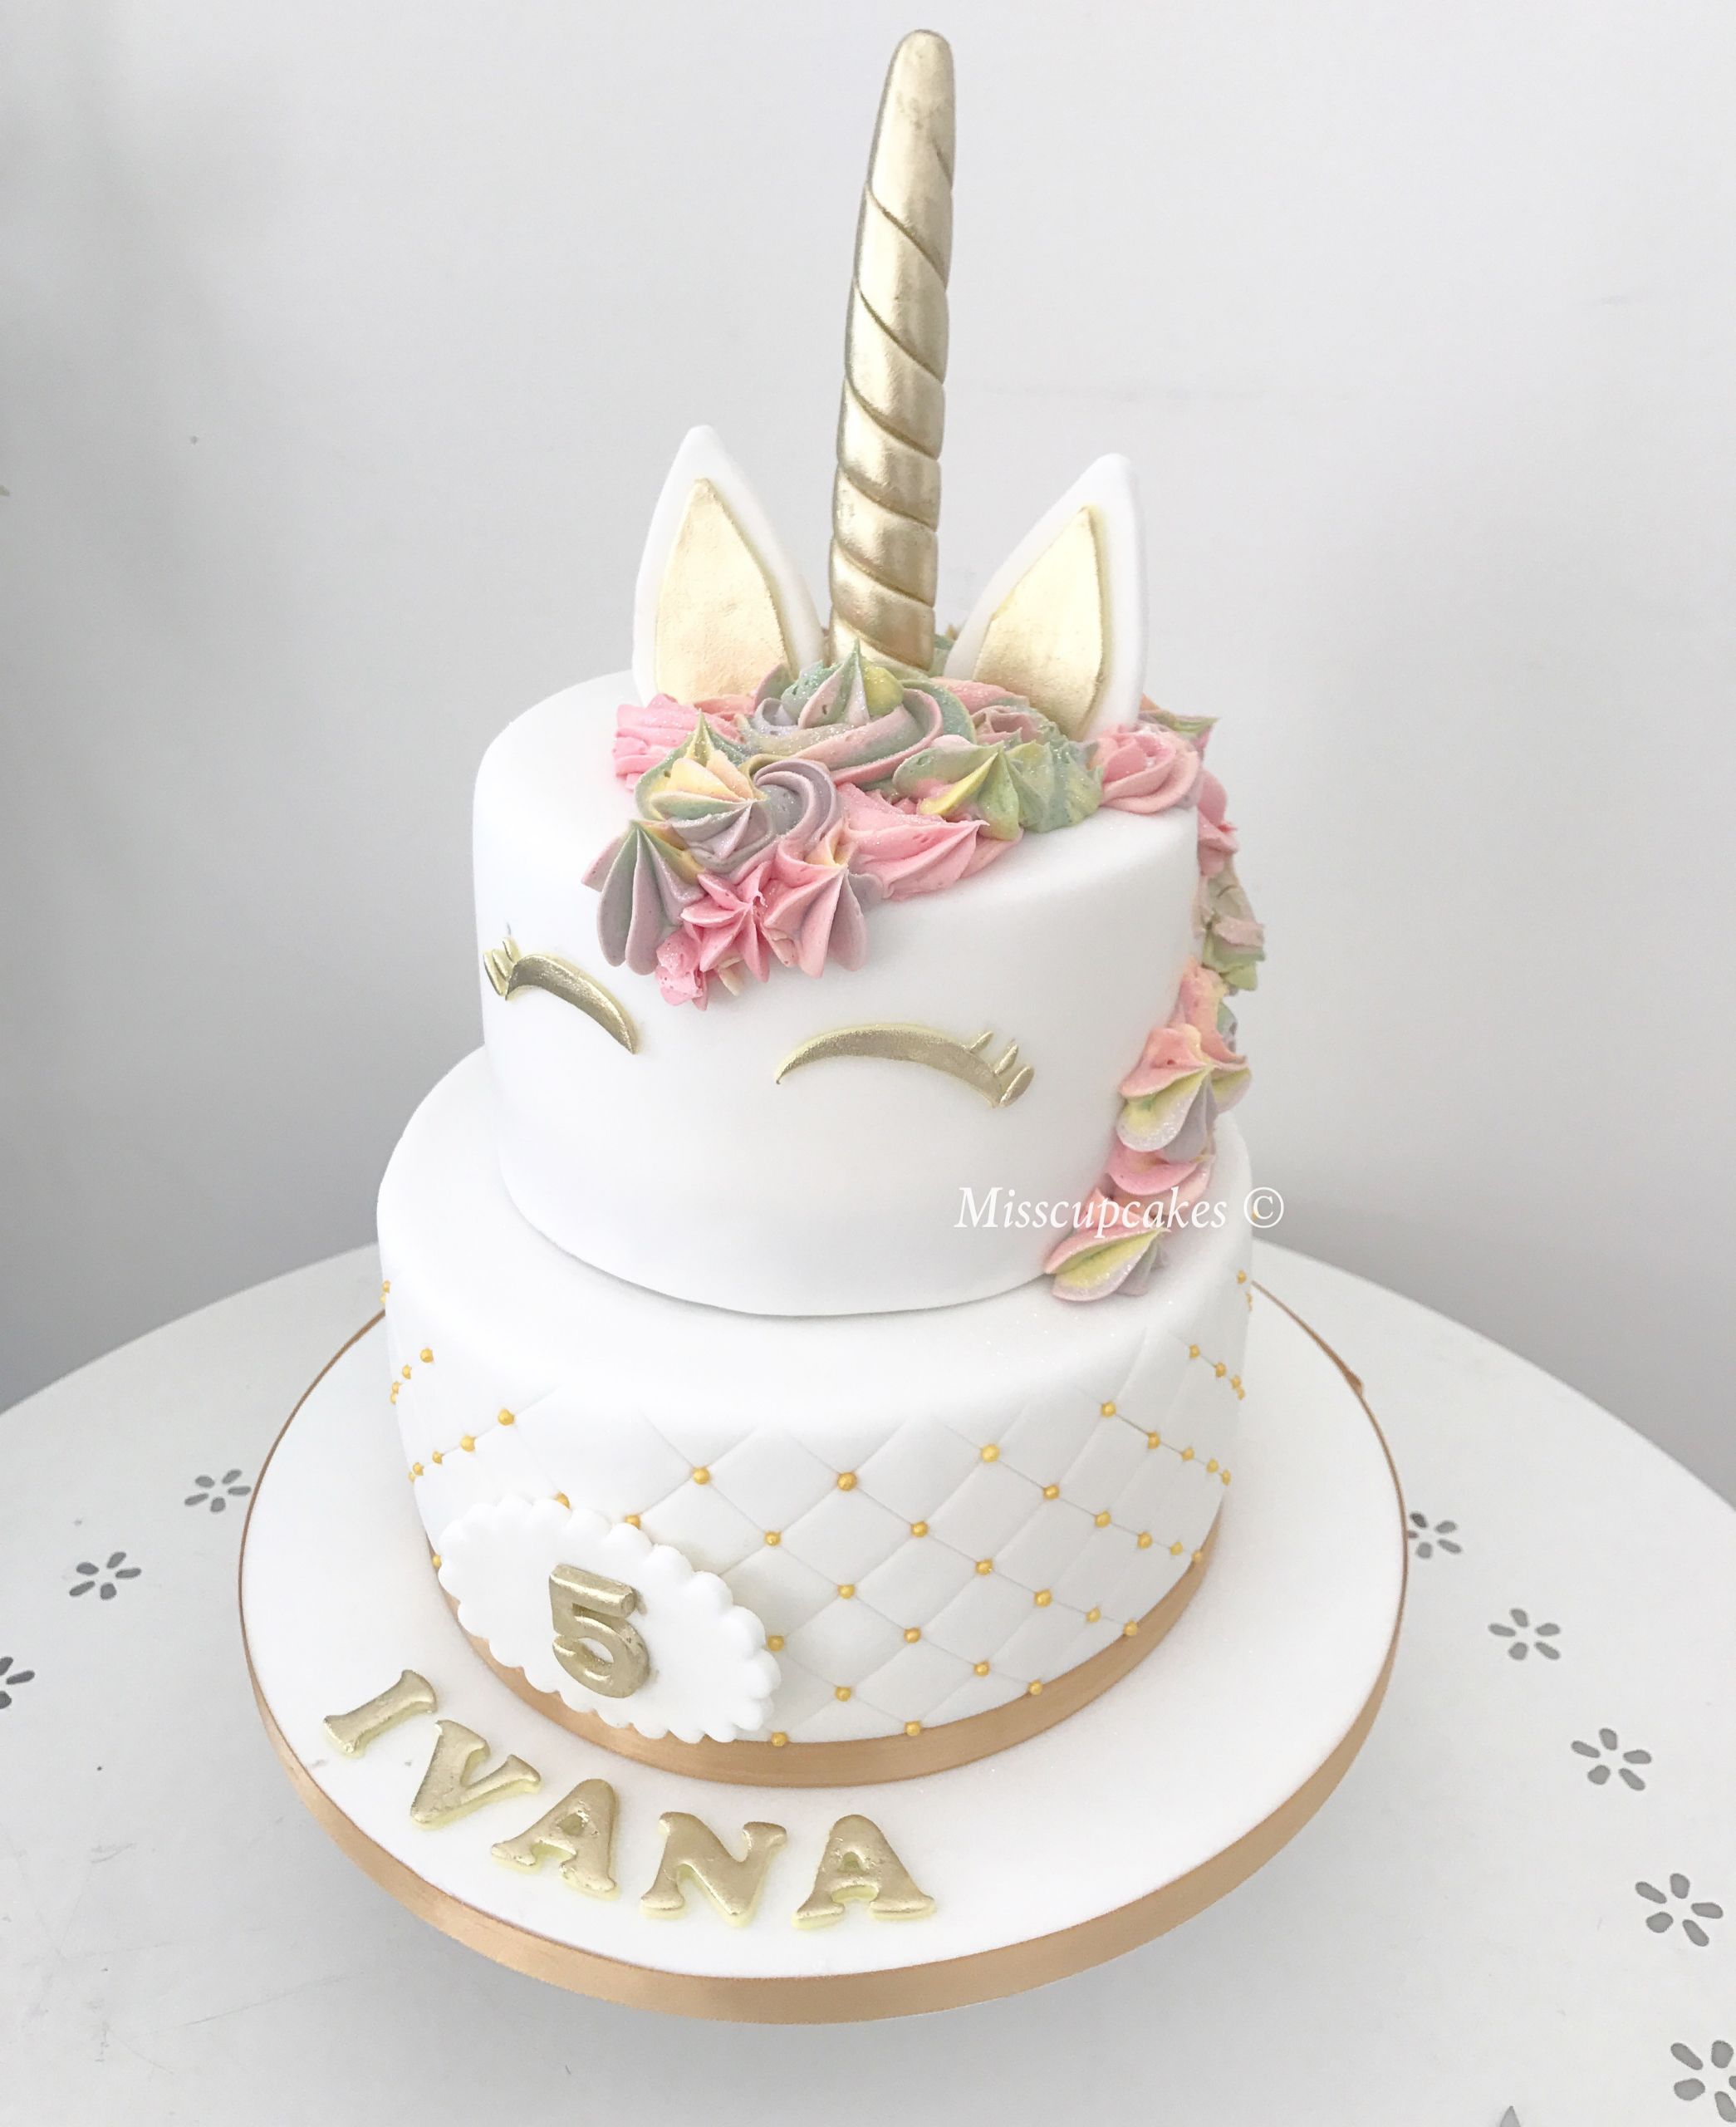 Two Tier Birthday Cake
 Miss Cupcakes Blog Archive 2 tiered Unicorn themed